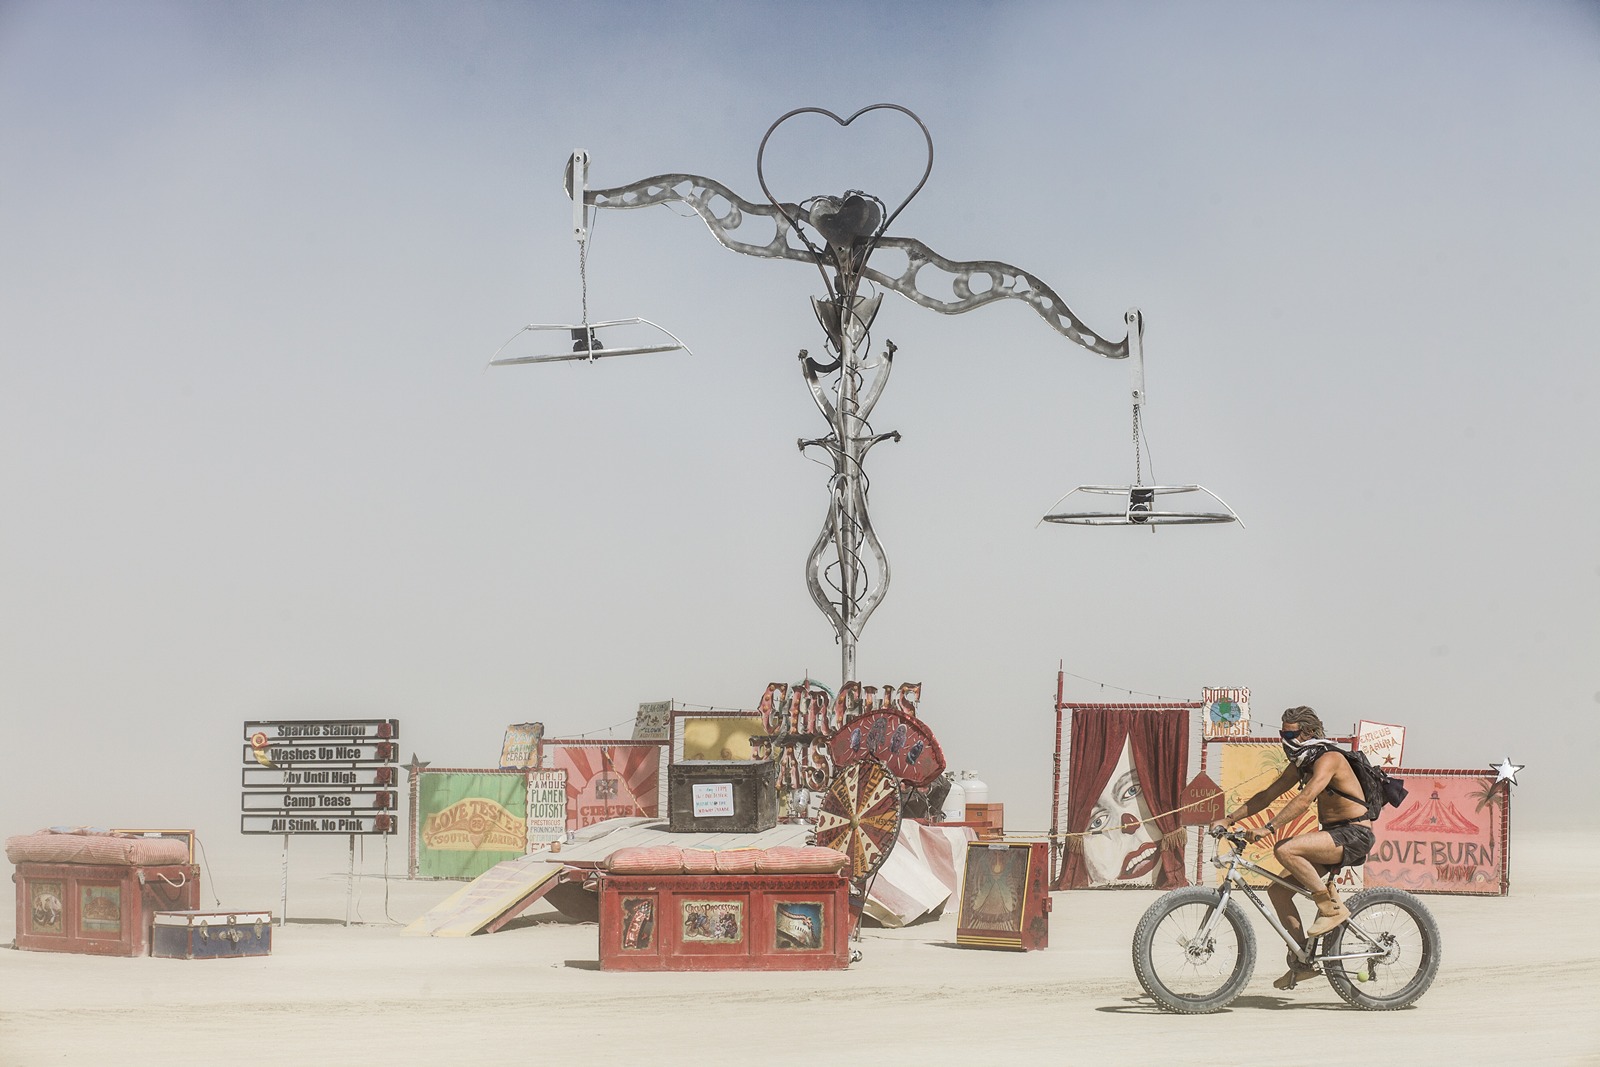 Burning Man - Don't ask what is it